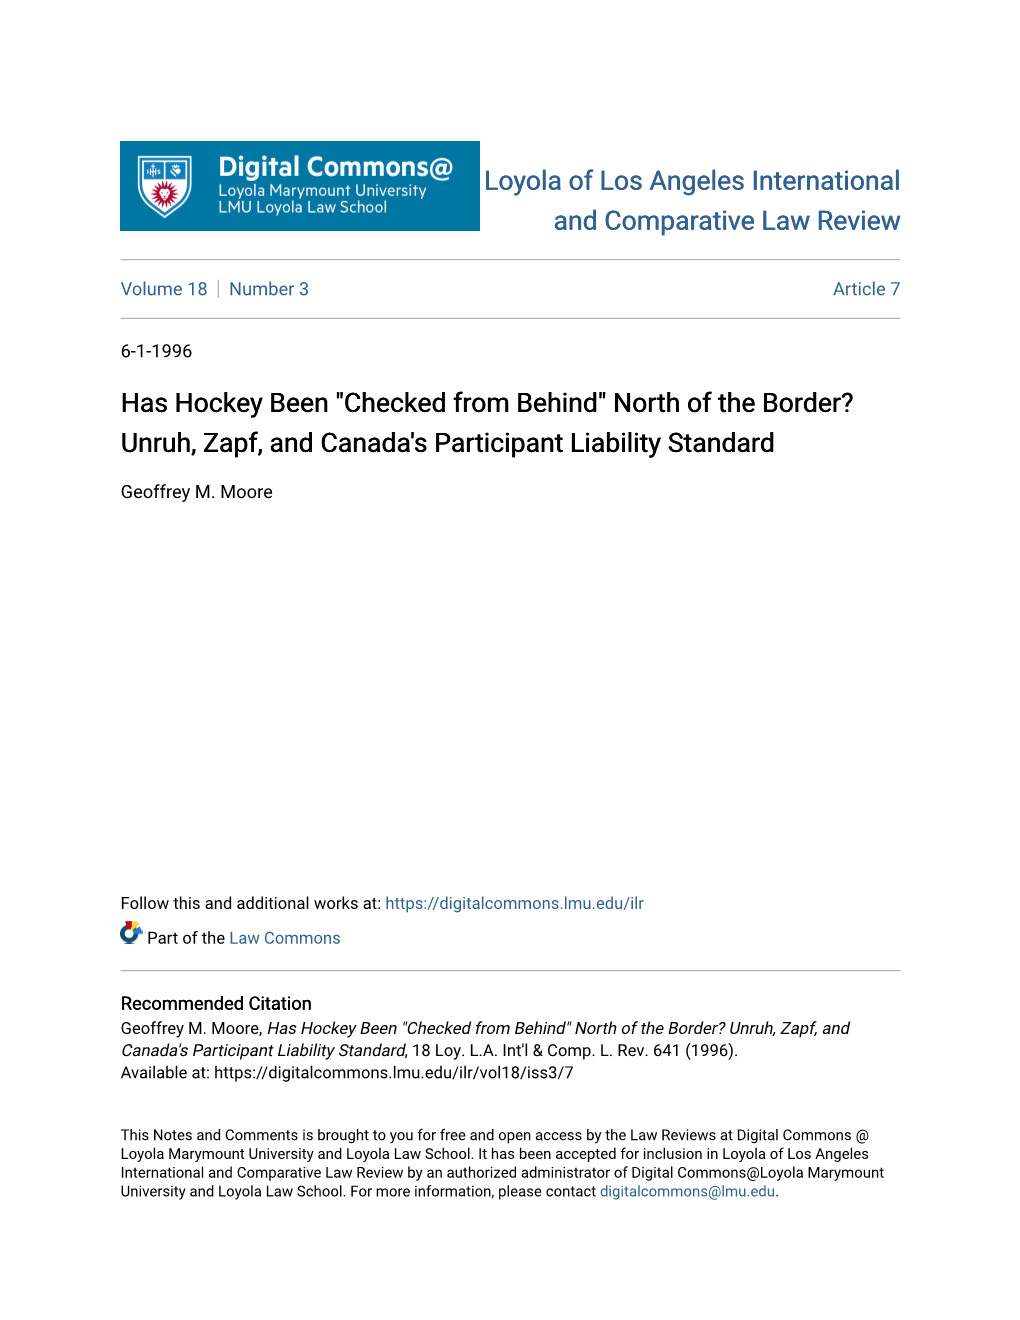 Has Hockey Been "Checked from Behind" North of the Border? Unruh, Zapf, and Canada's Participant Liability Standard